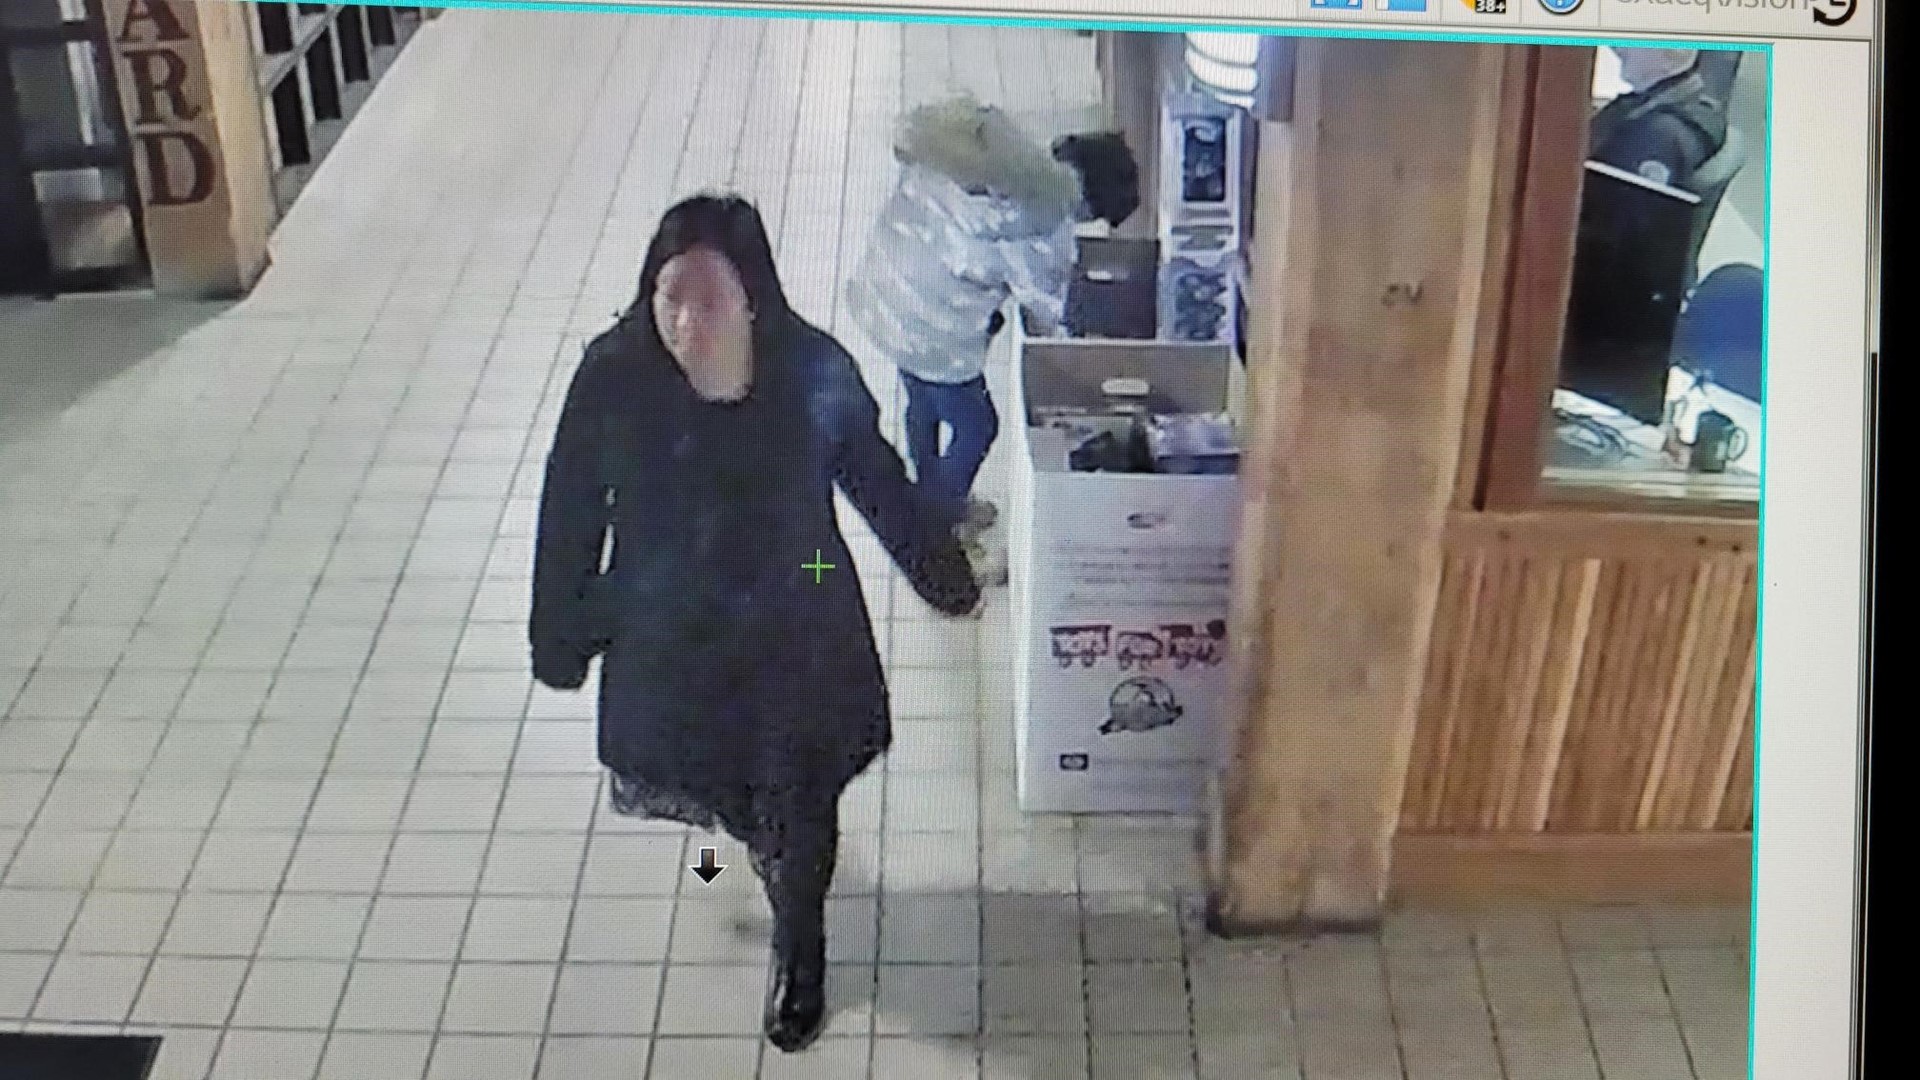 A series of images from a Grand Rapids building show a woman and presumed minor appearing to steal toys from a donation bin.